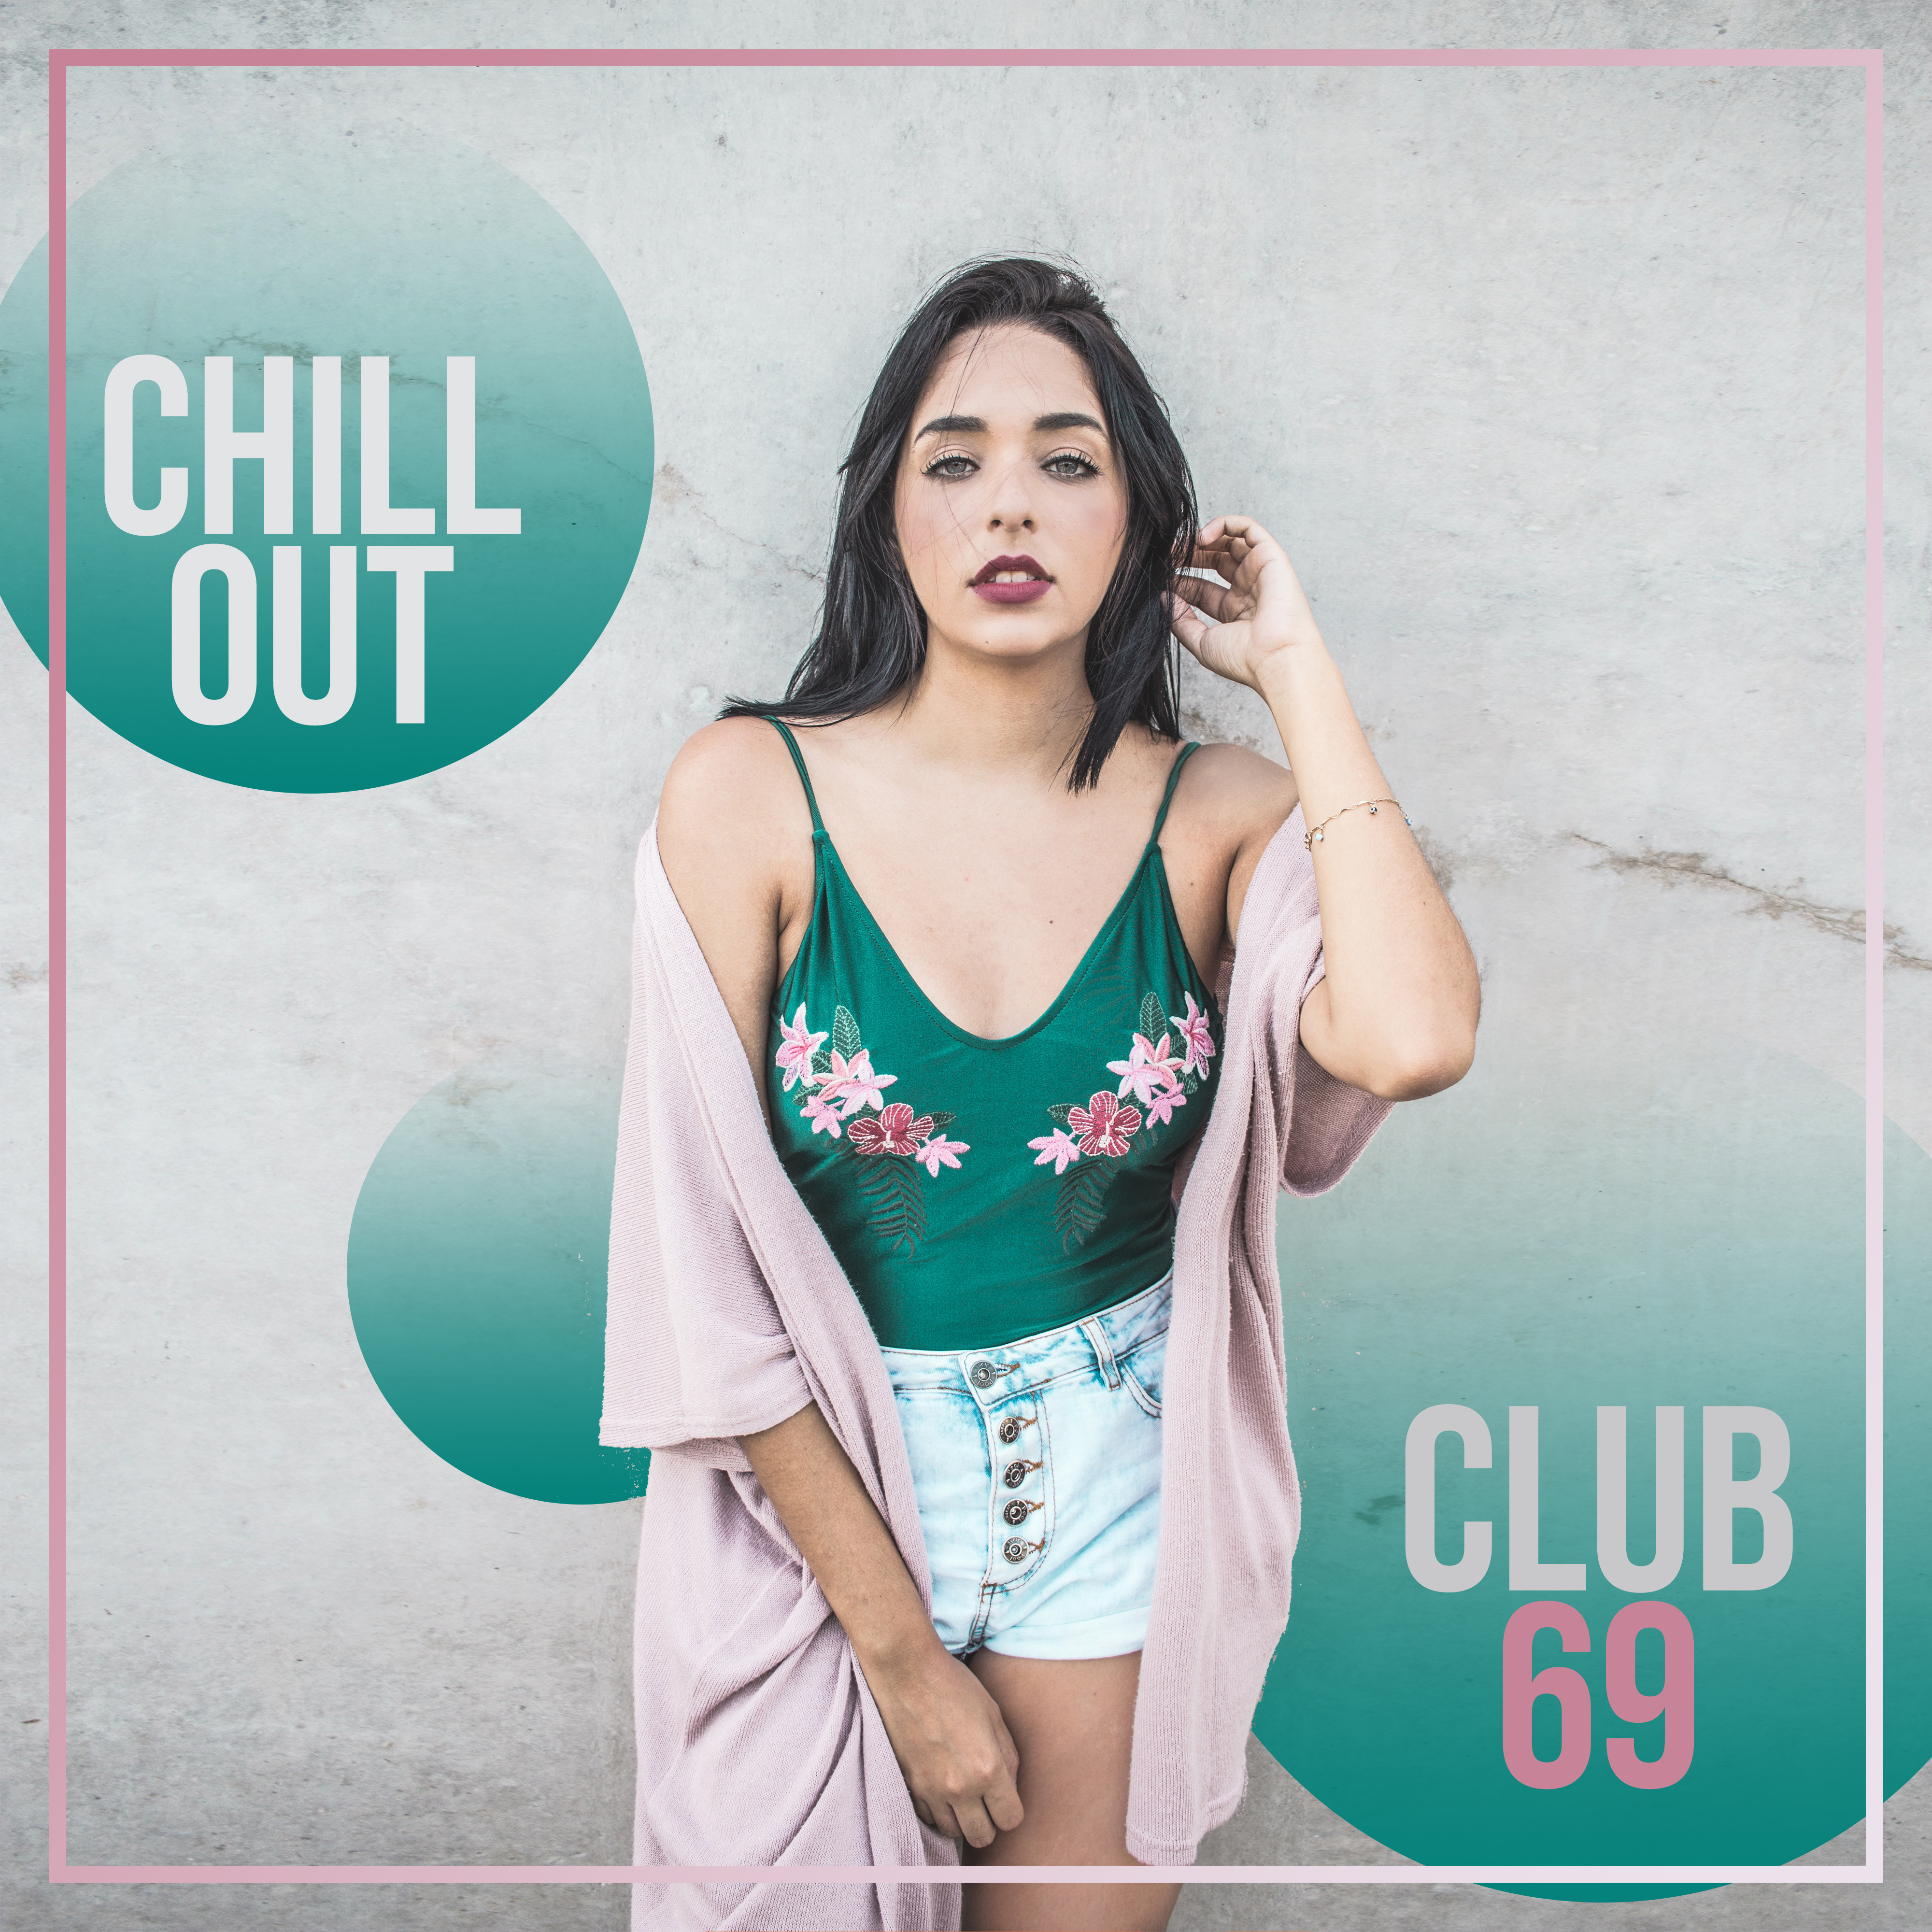 Chillout Club 69